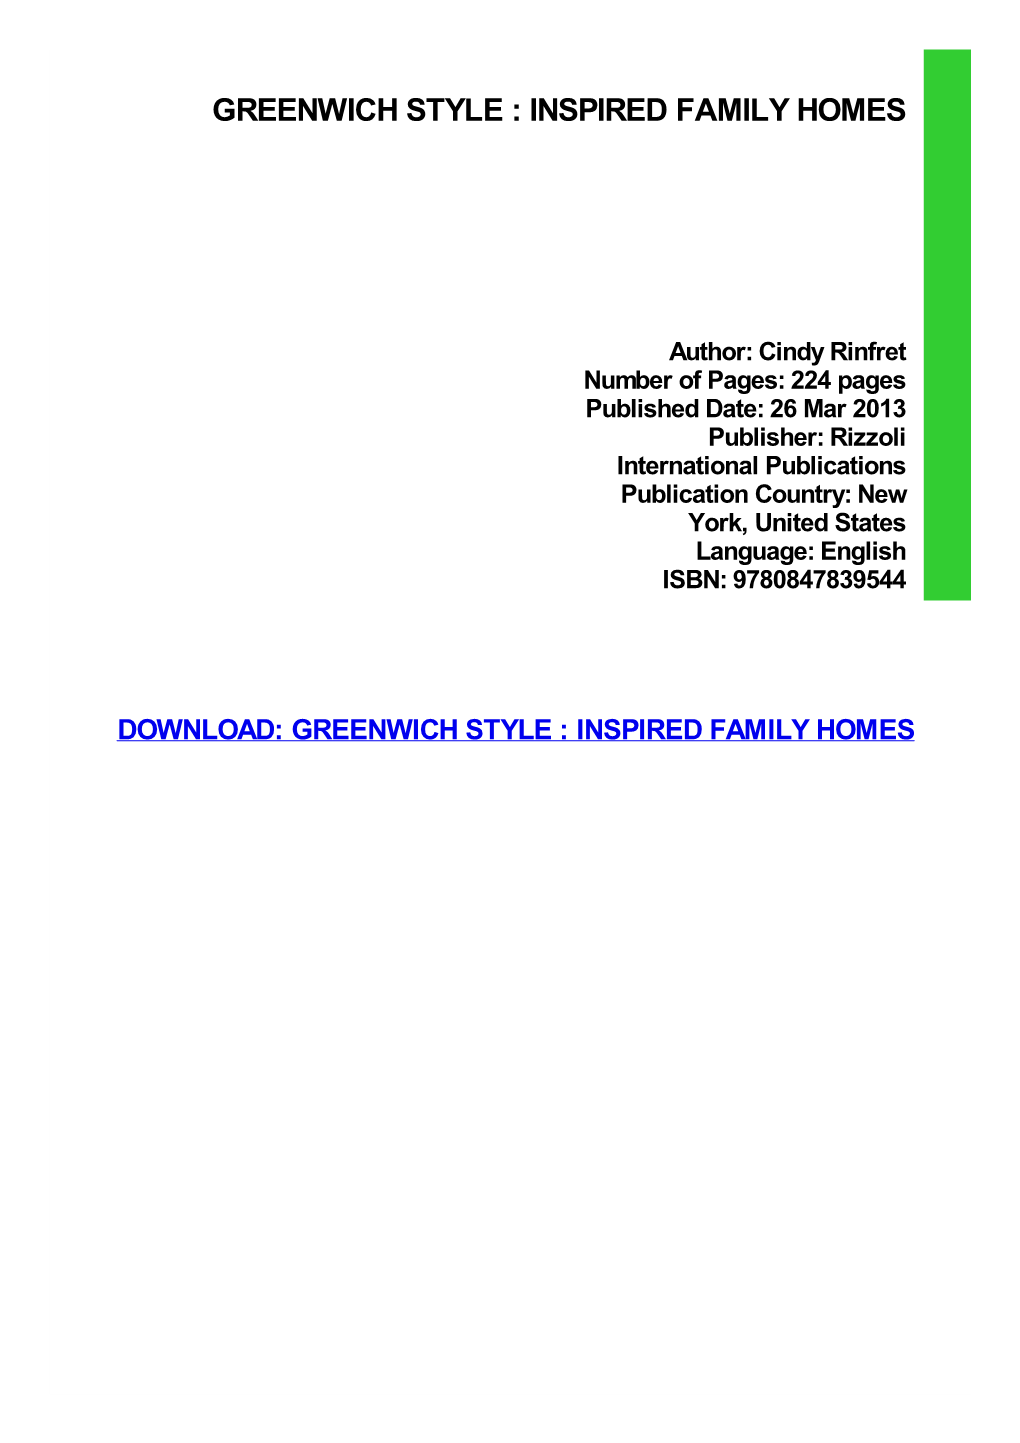 Greenwich Style : Inspired Family Homes Download Free